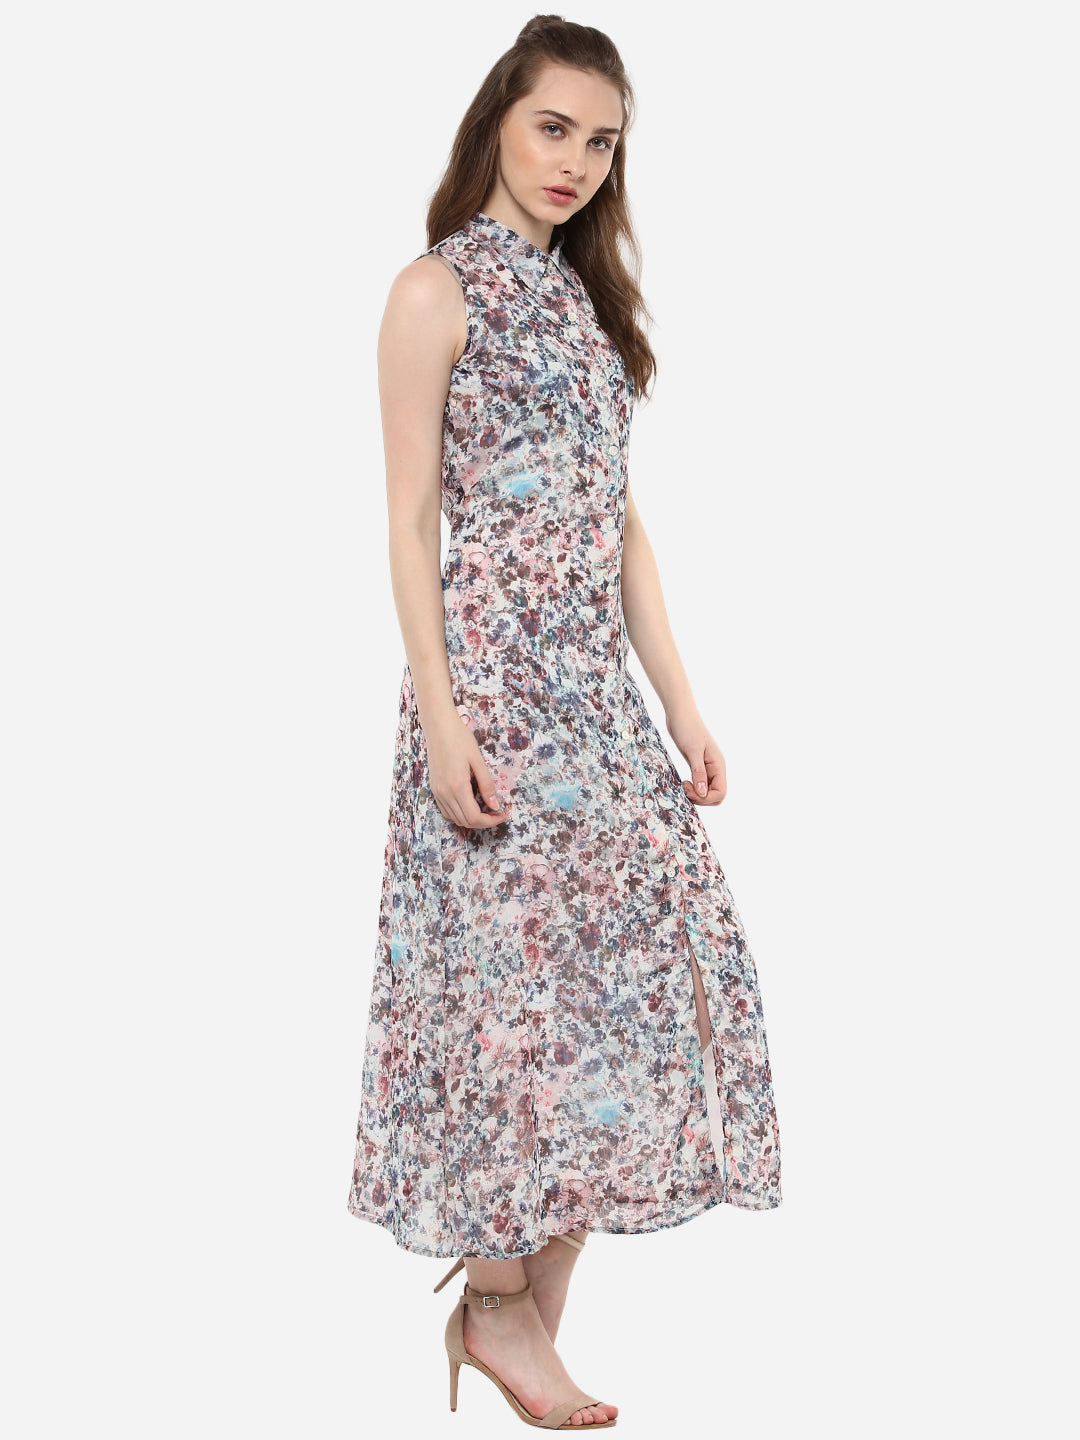 Women's Printed Floral Maxi Dress